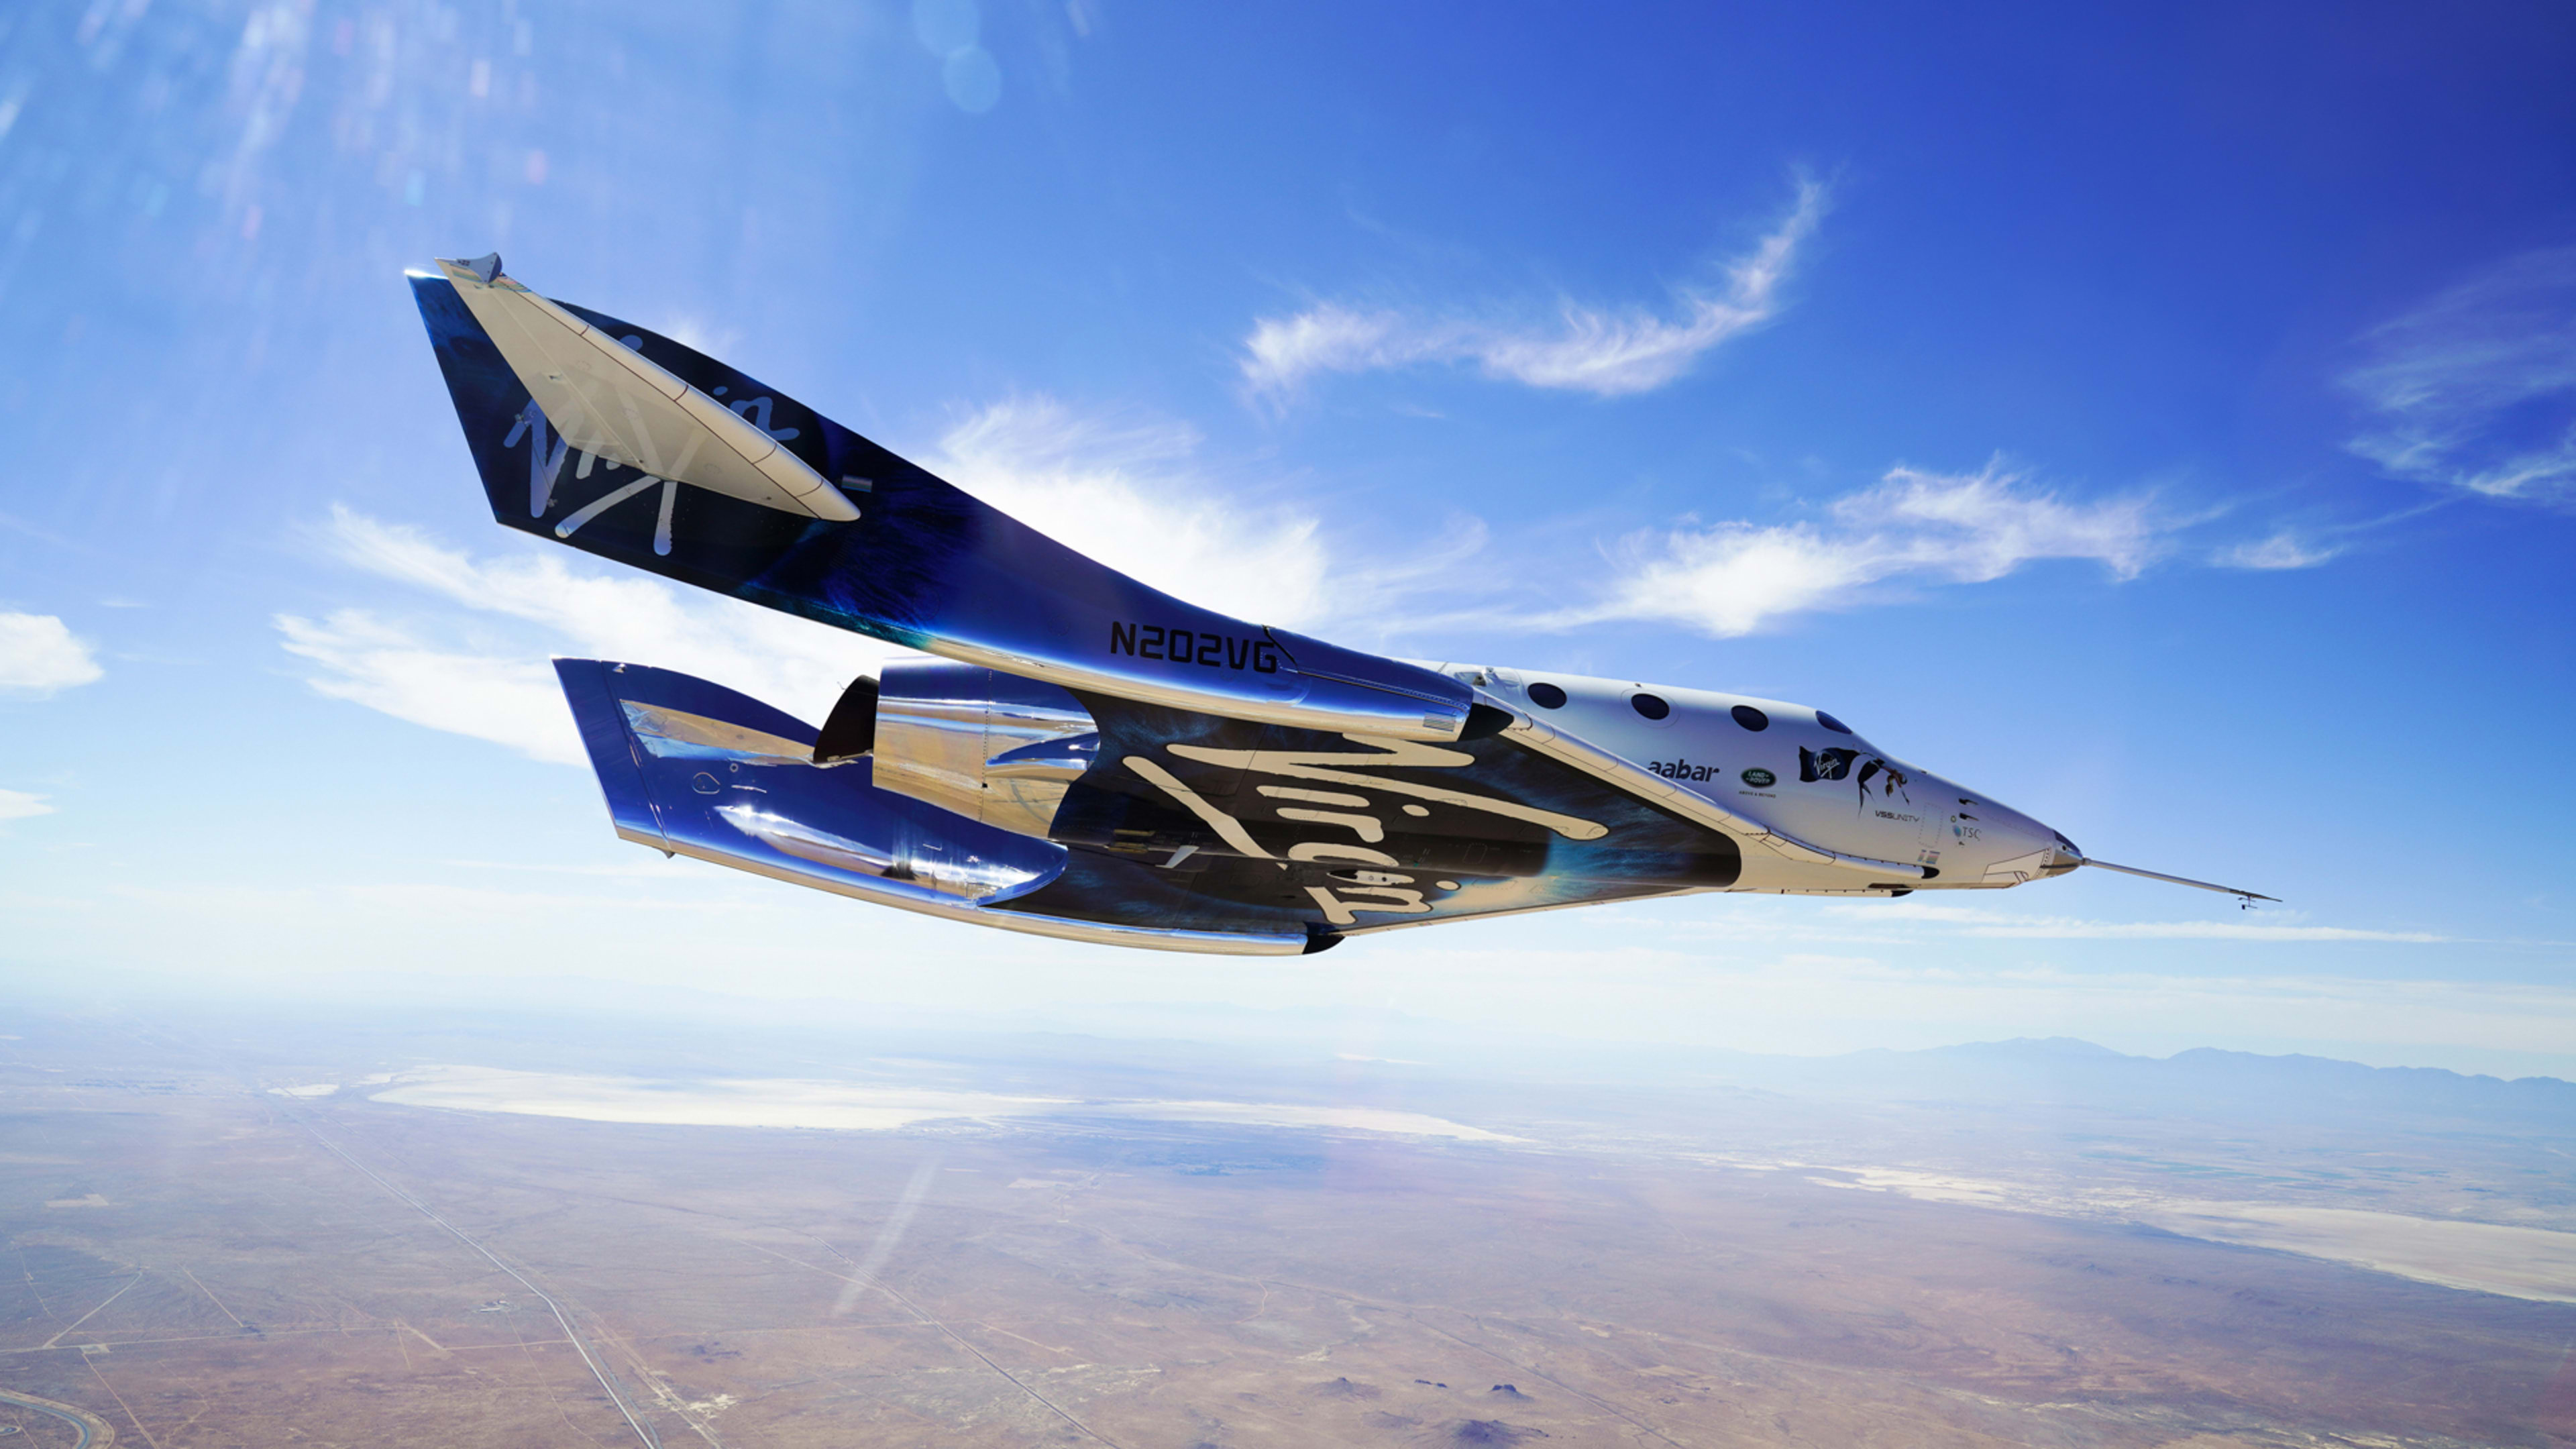 Here’s why Richard Branson’s Virgin Galactic is going public